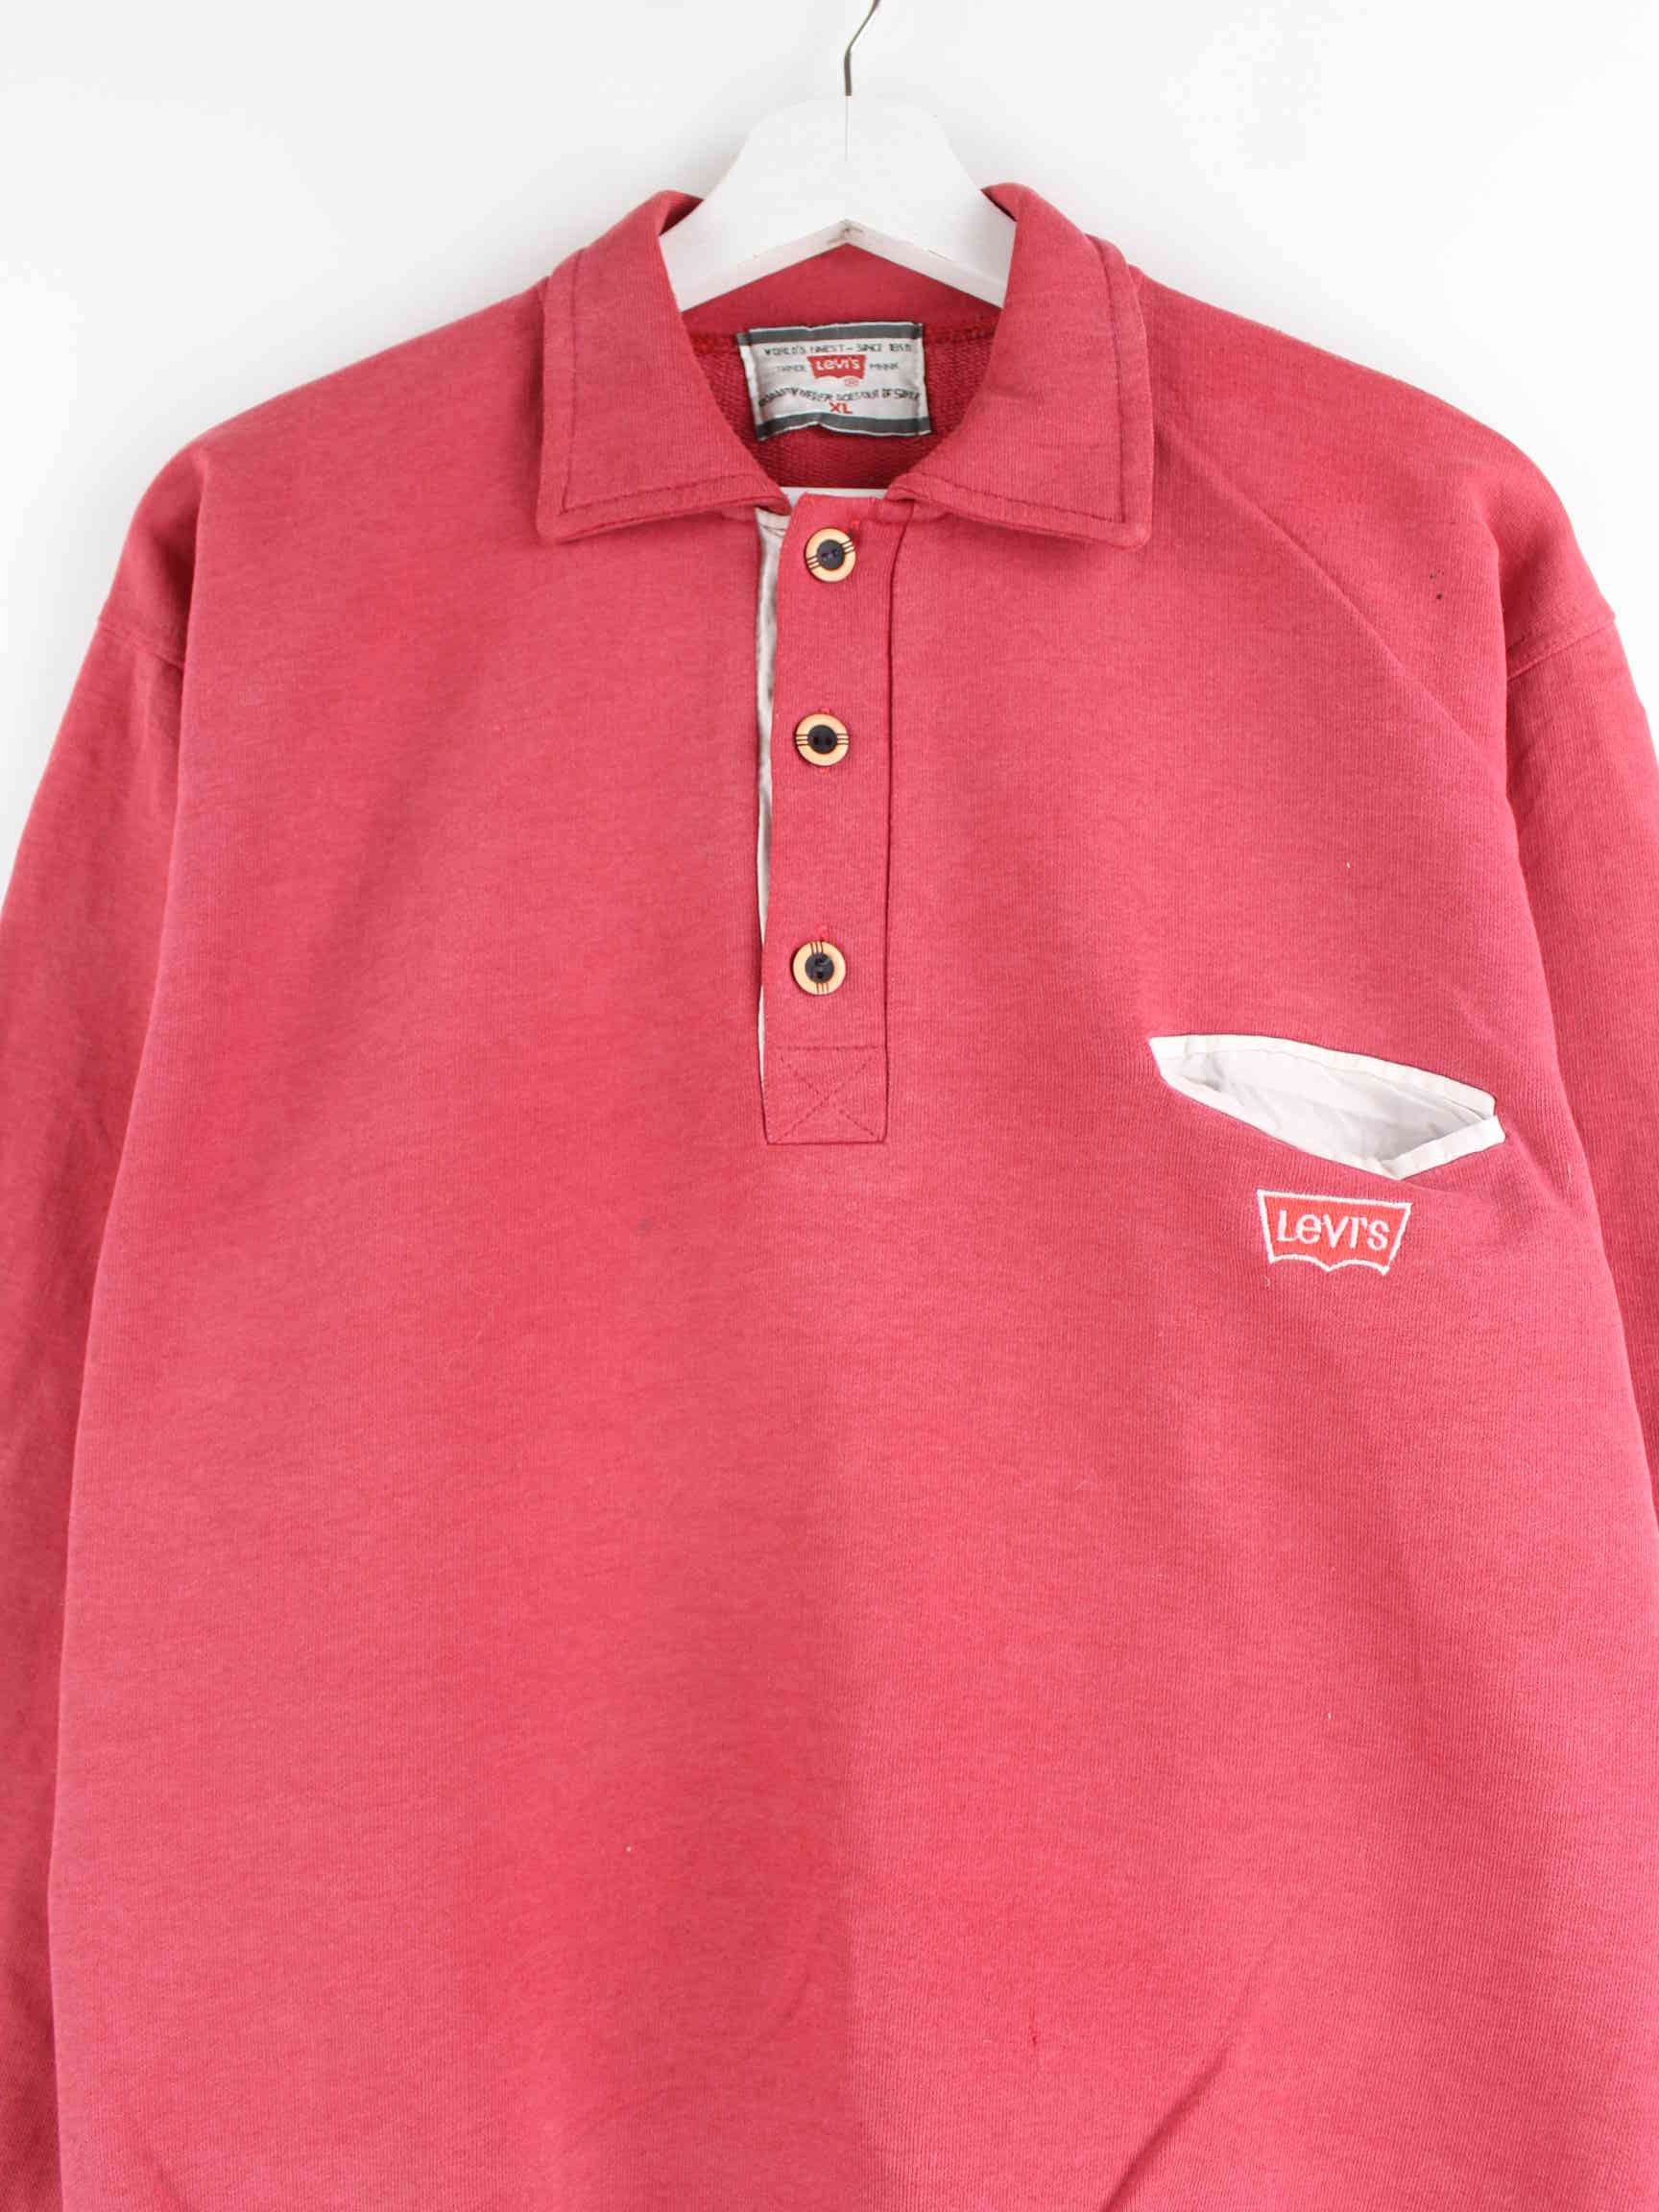 Levi's 90s Vintage Polo Sweater Rot M (detail image 1)